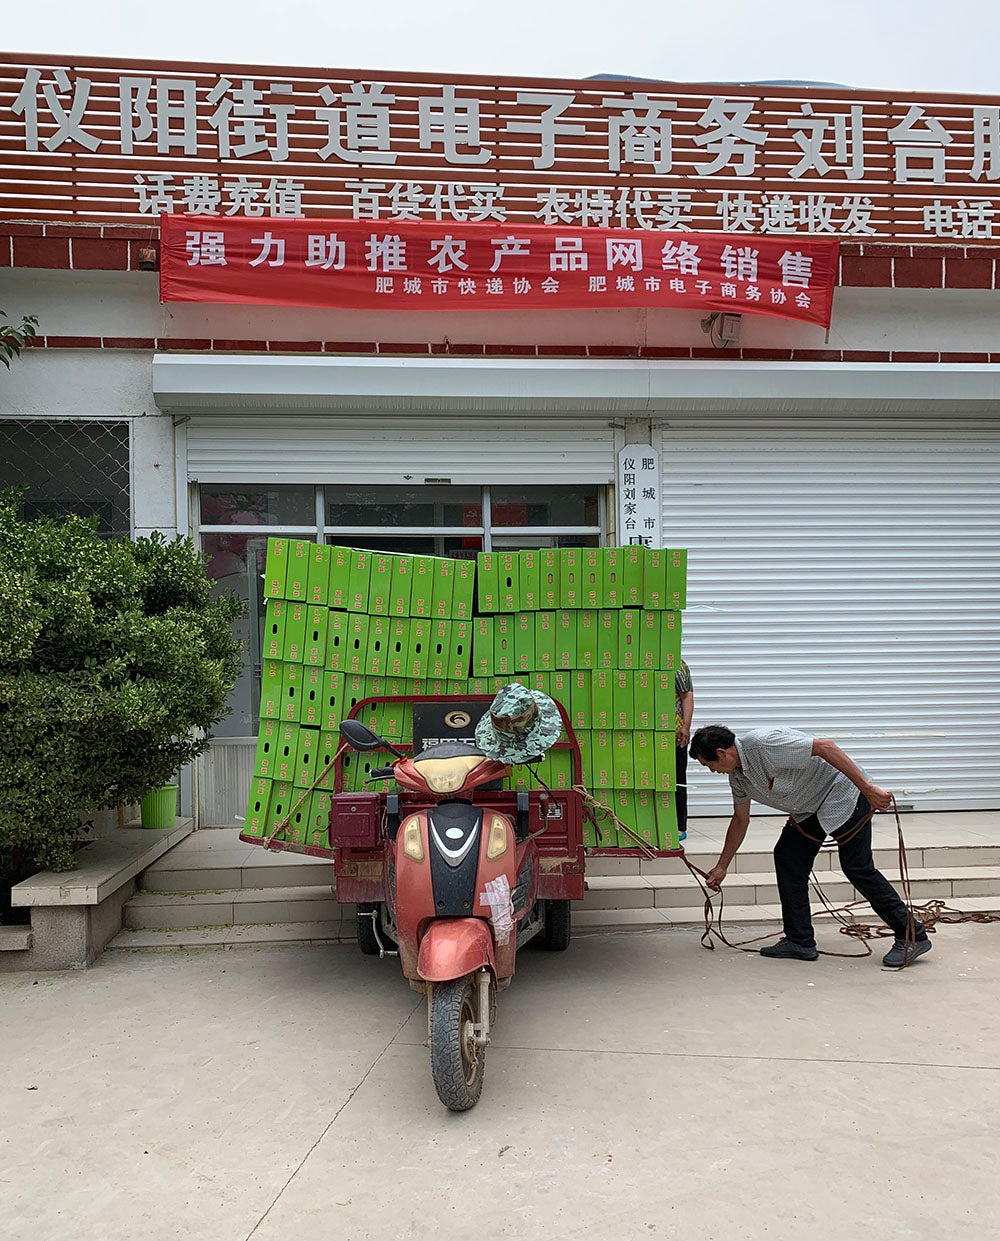 Peaches are picked up from a cooperative in Feicheng to be delivered to customers who purchased them online. Photo: Maria Fernandez Vidal